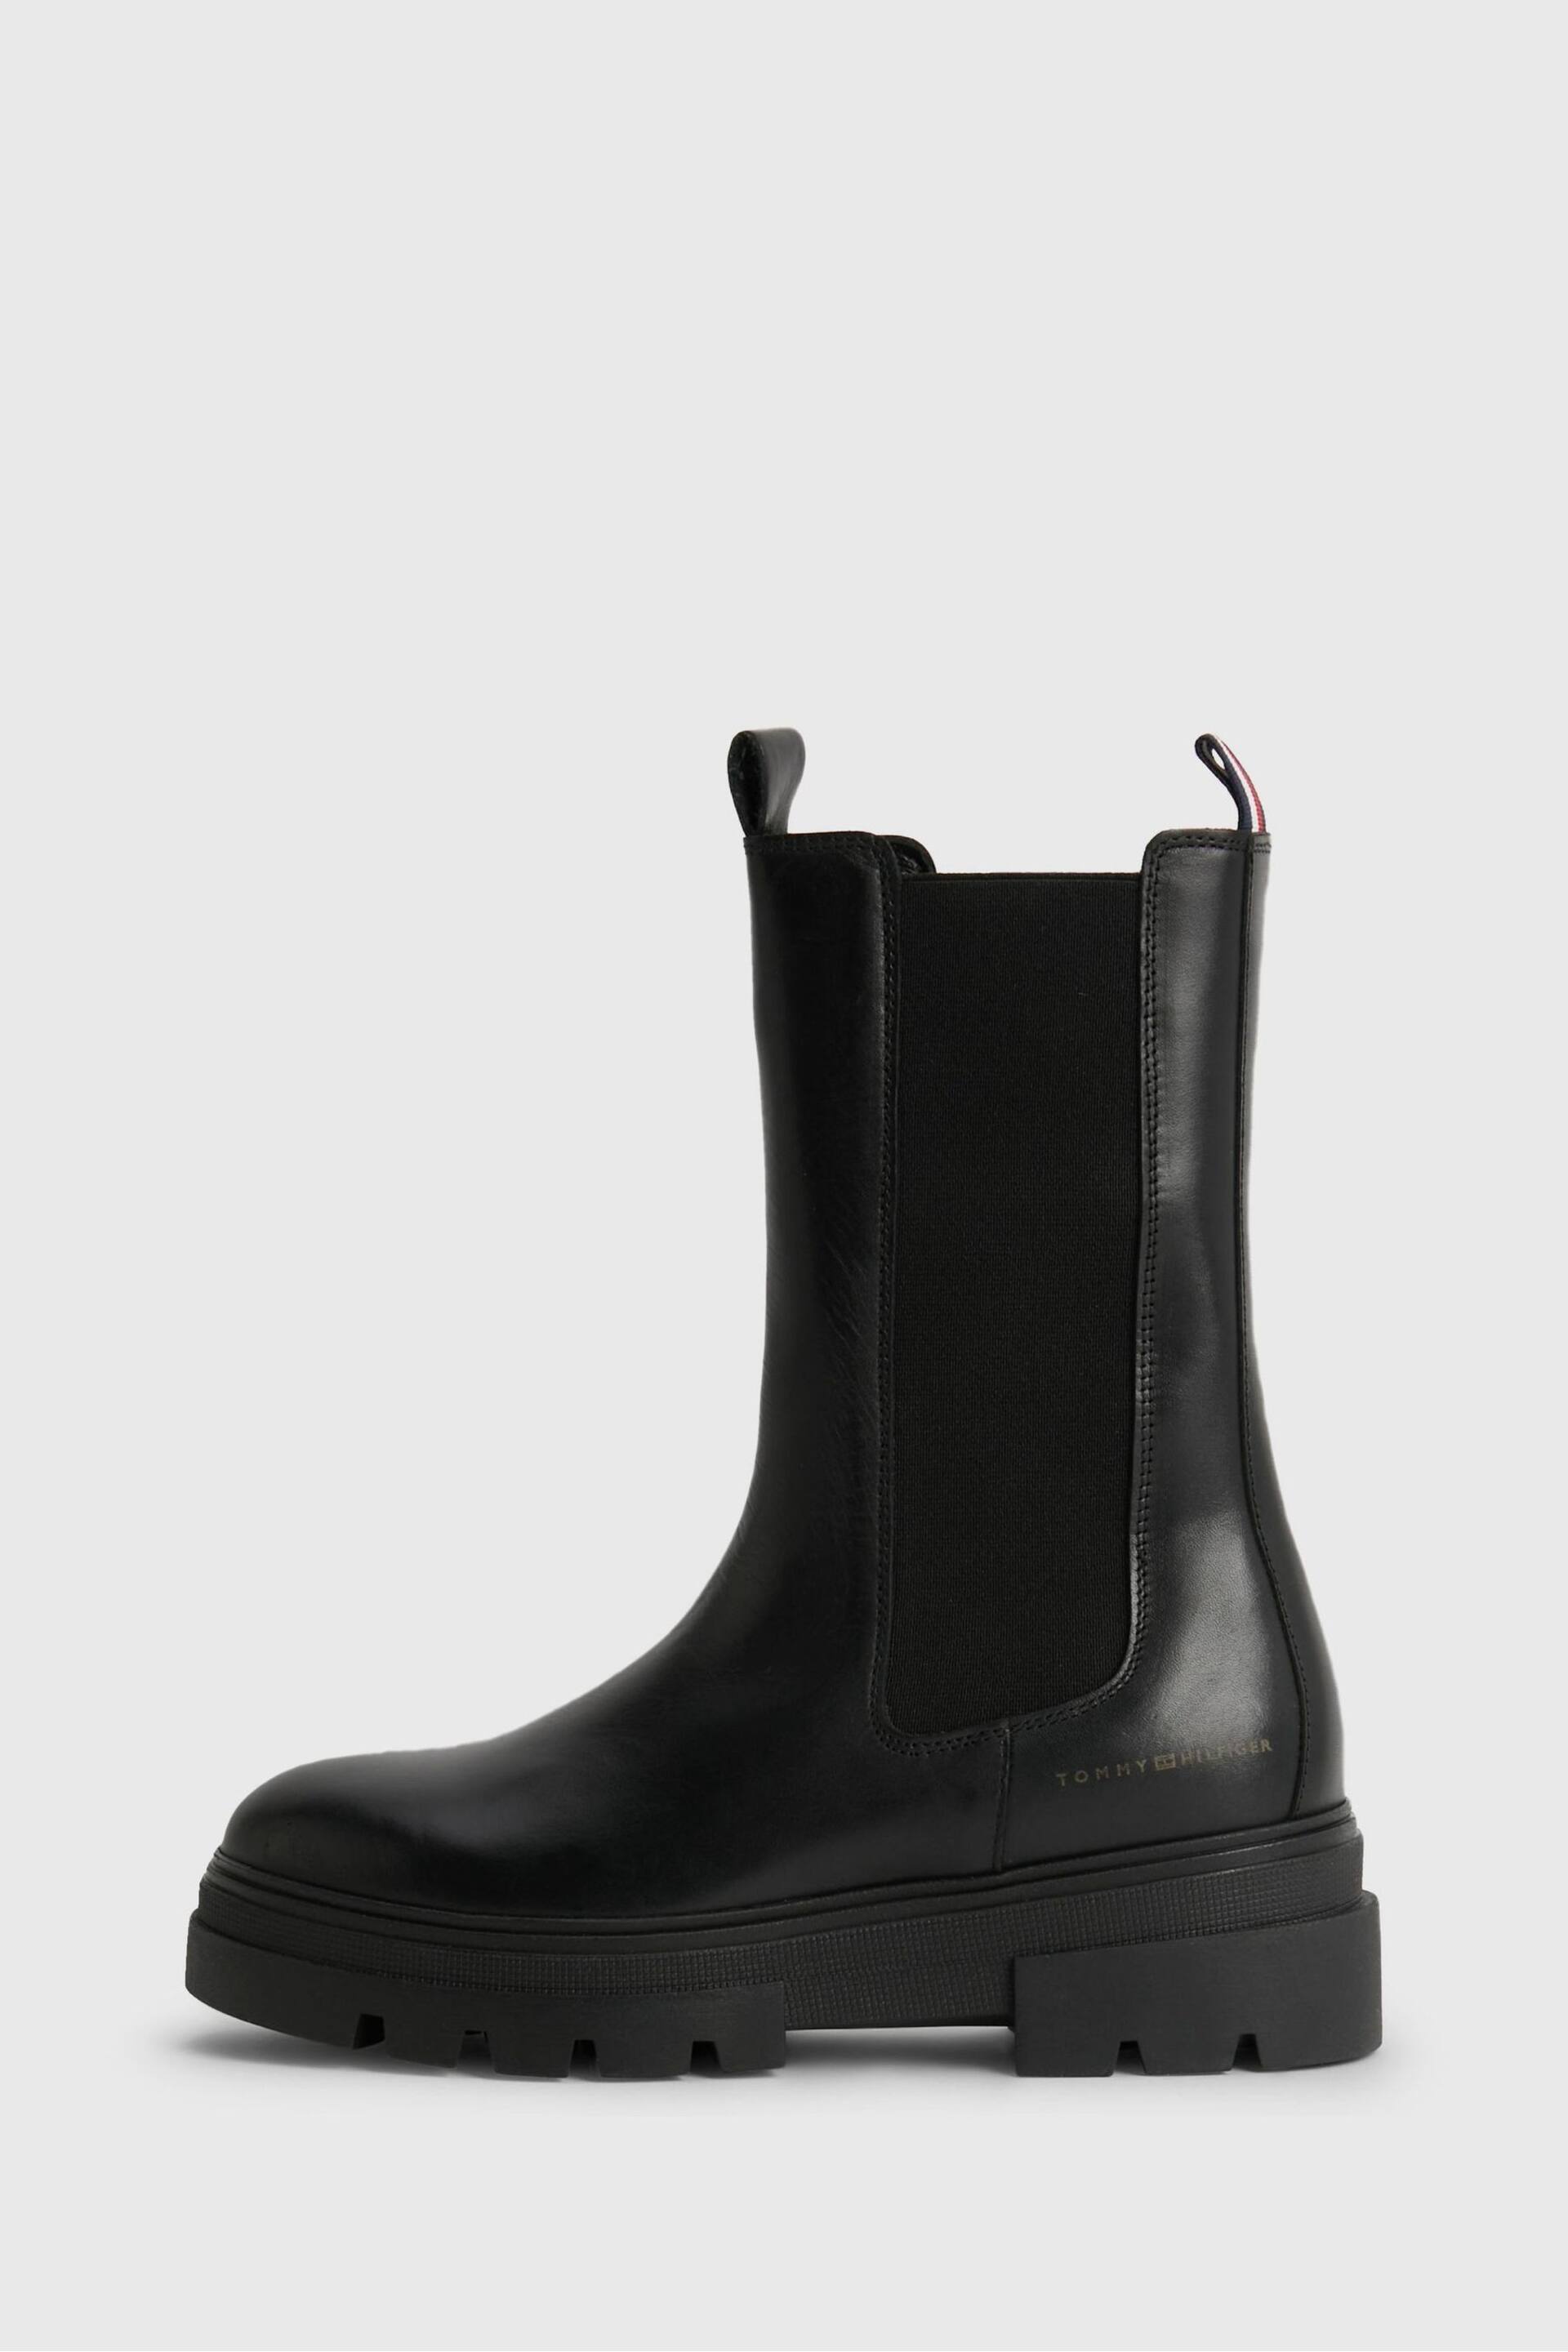 Tommy Hilfiger High Rise Chelsea Black Boots - Image 2 of 6